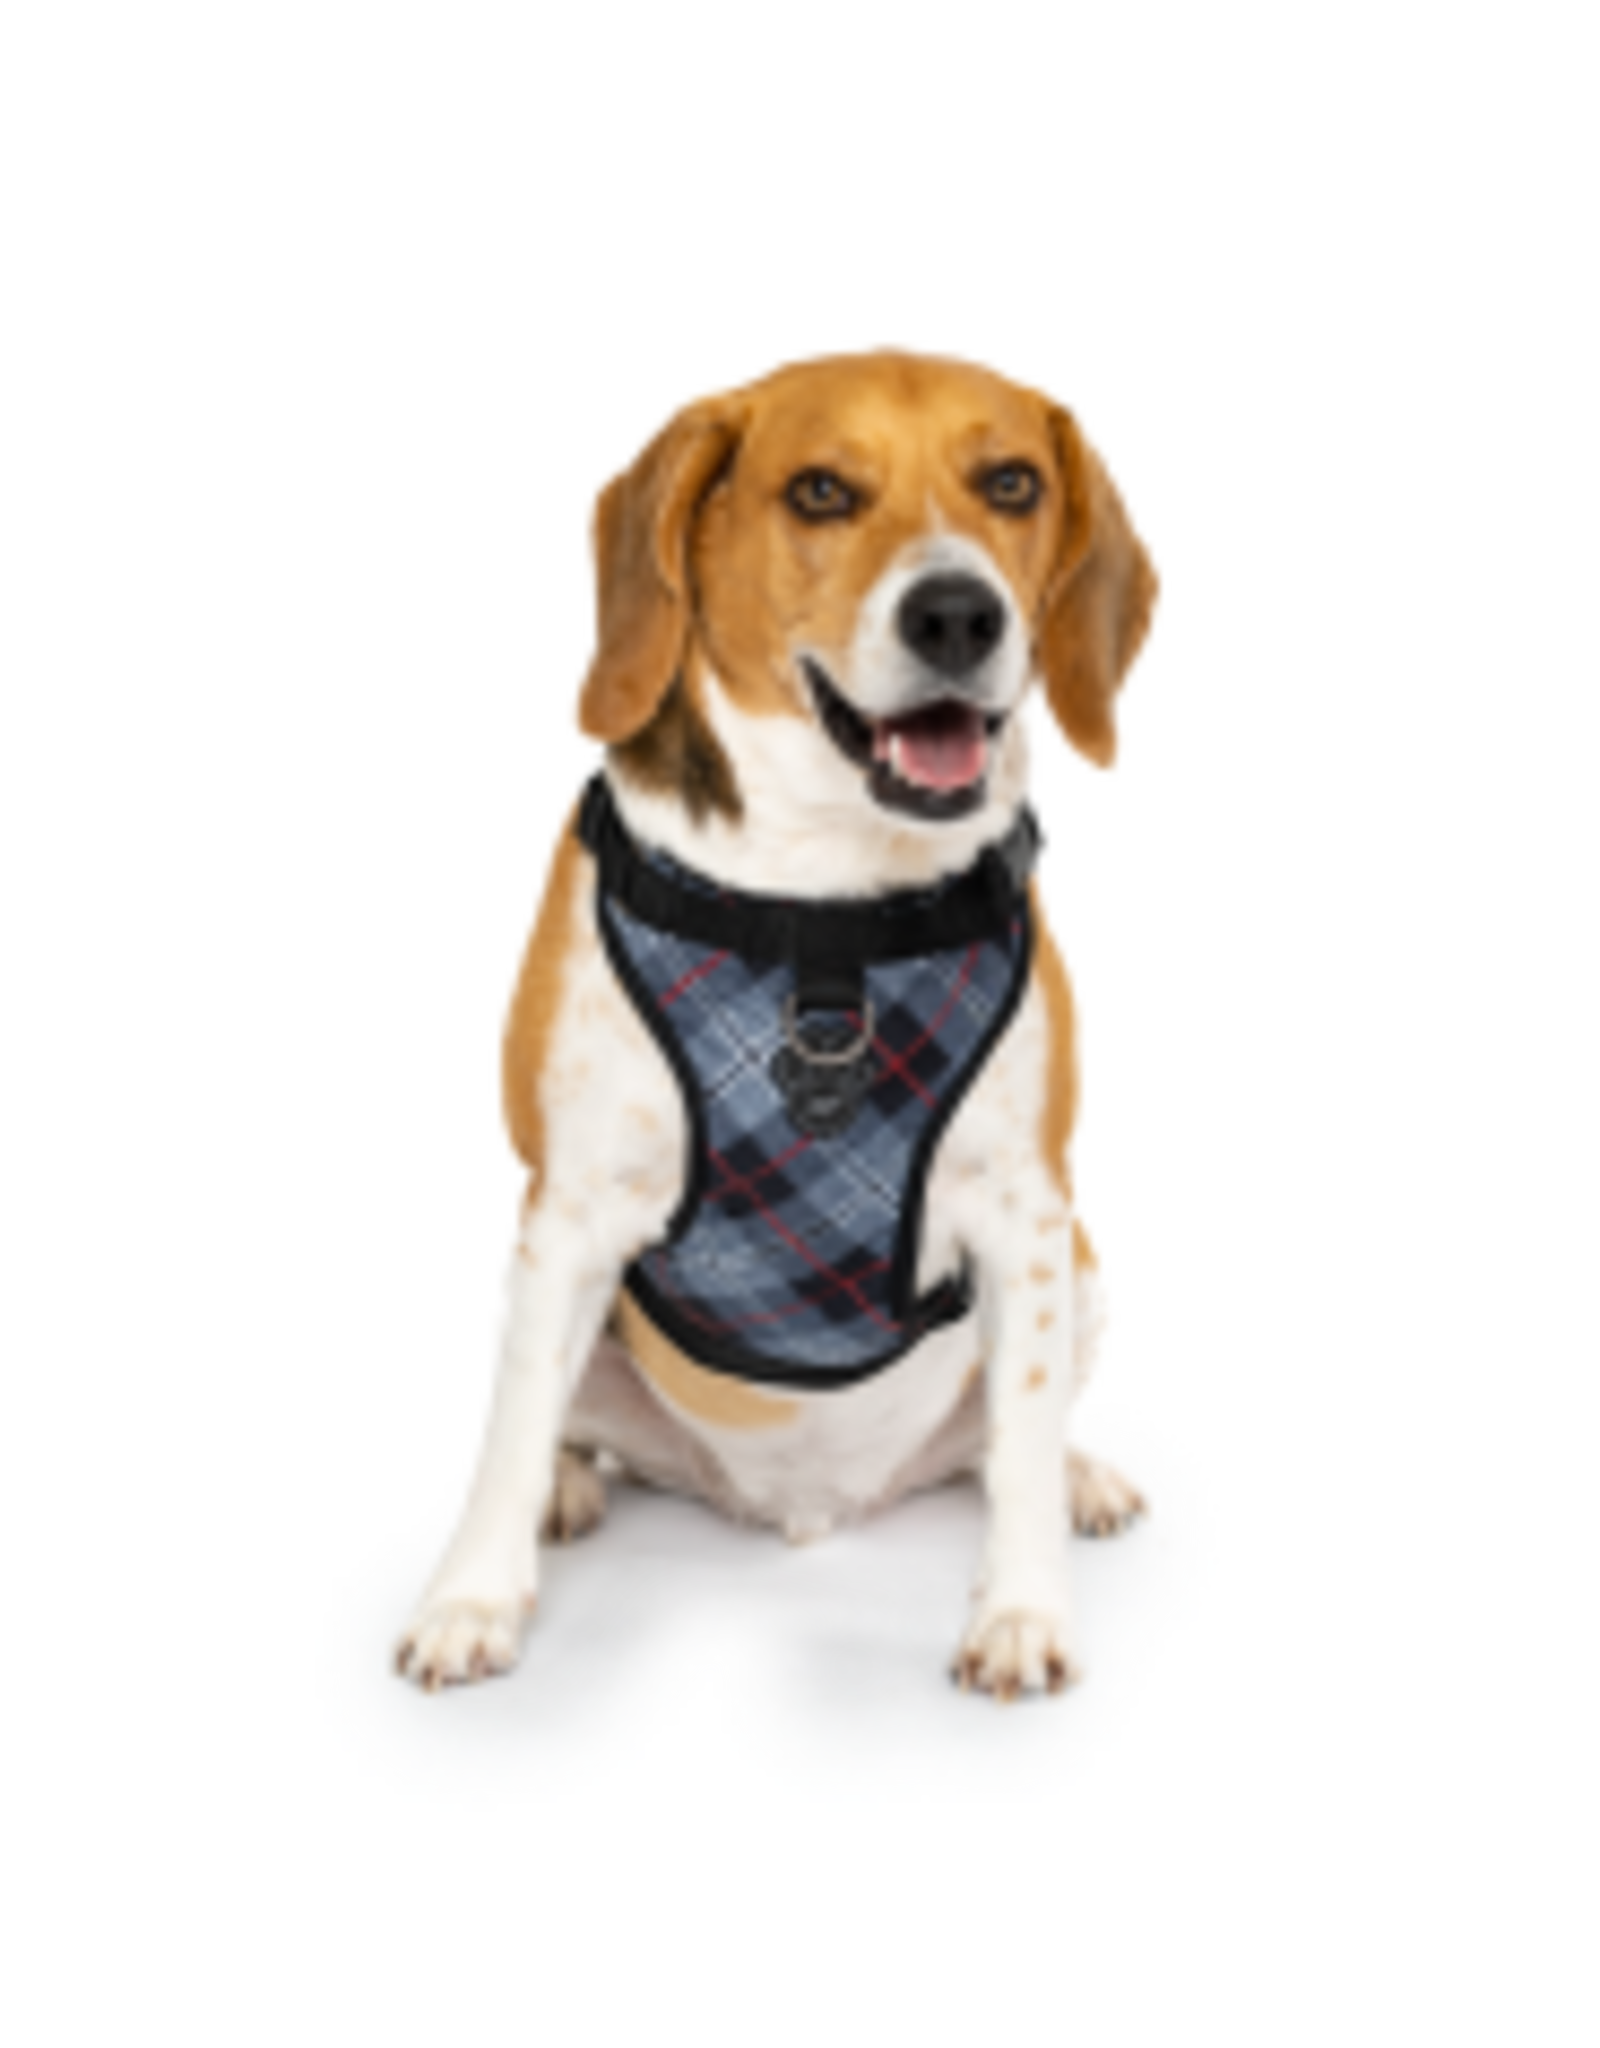 Canada Pooch Everything Harness Water-Resistant